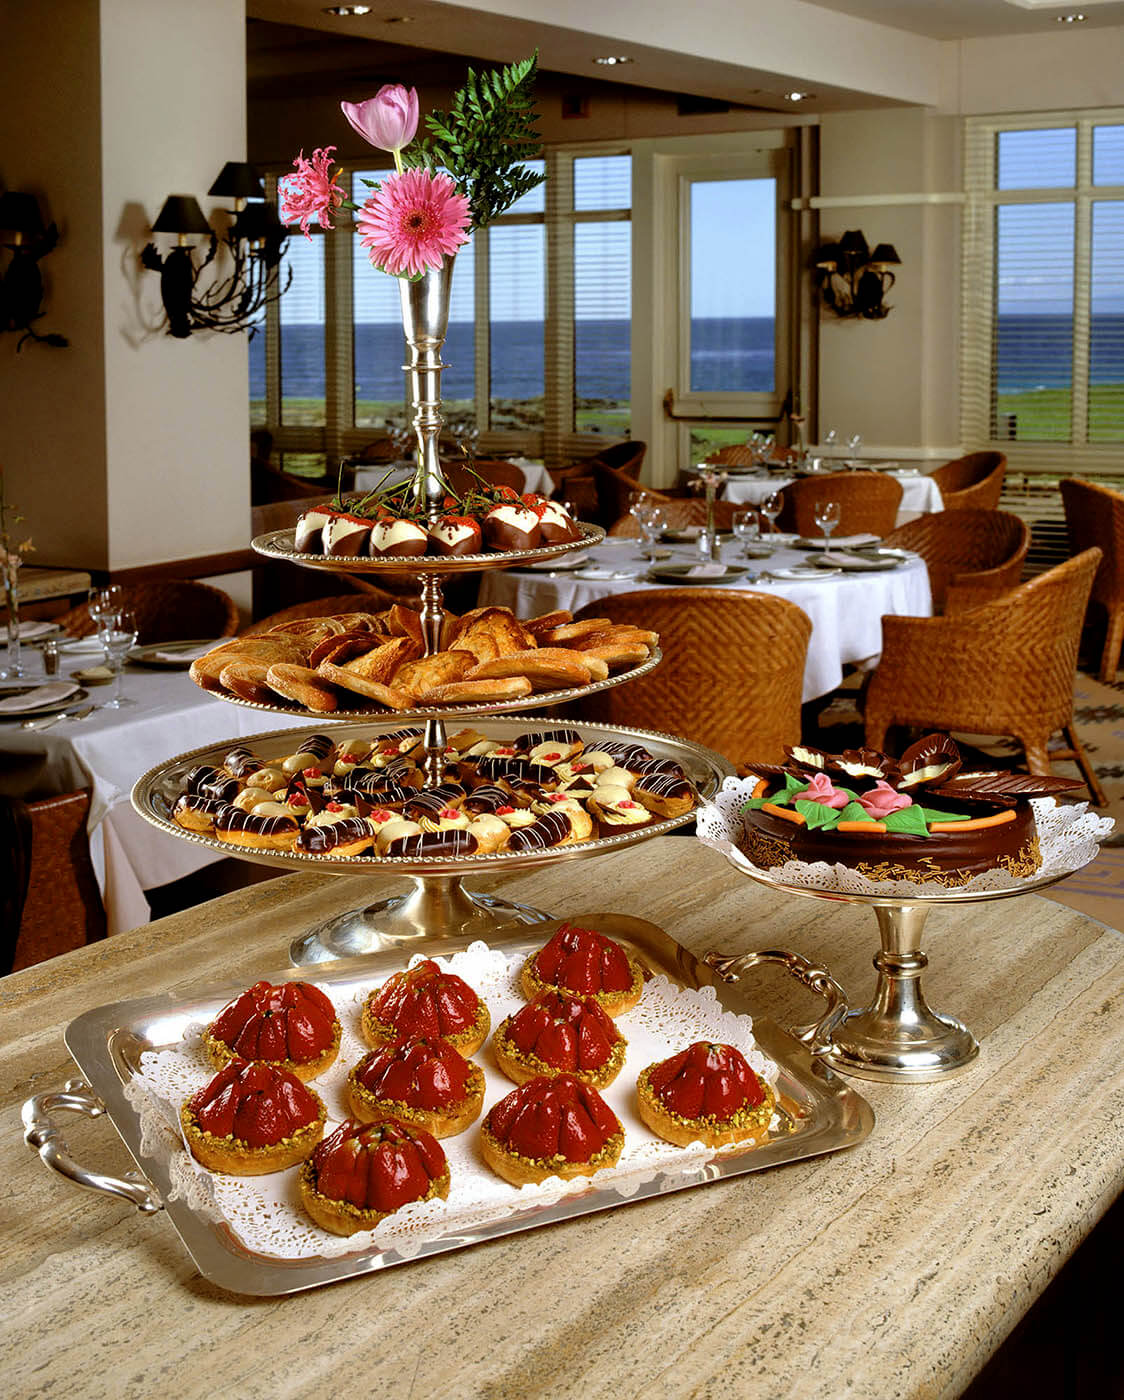 Deserts at a Spanish Bay restaurant displaying chocolate covered strawberries, chocolate cake, strawberry tarts and cookies.  Food photography by Craig Lovell.